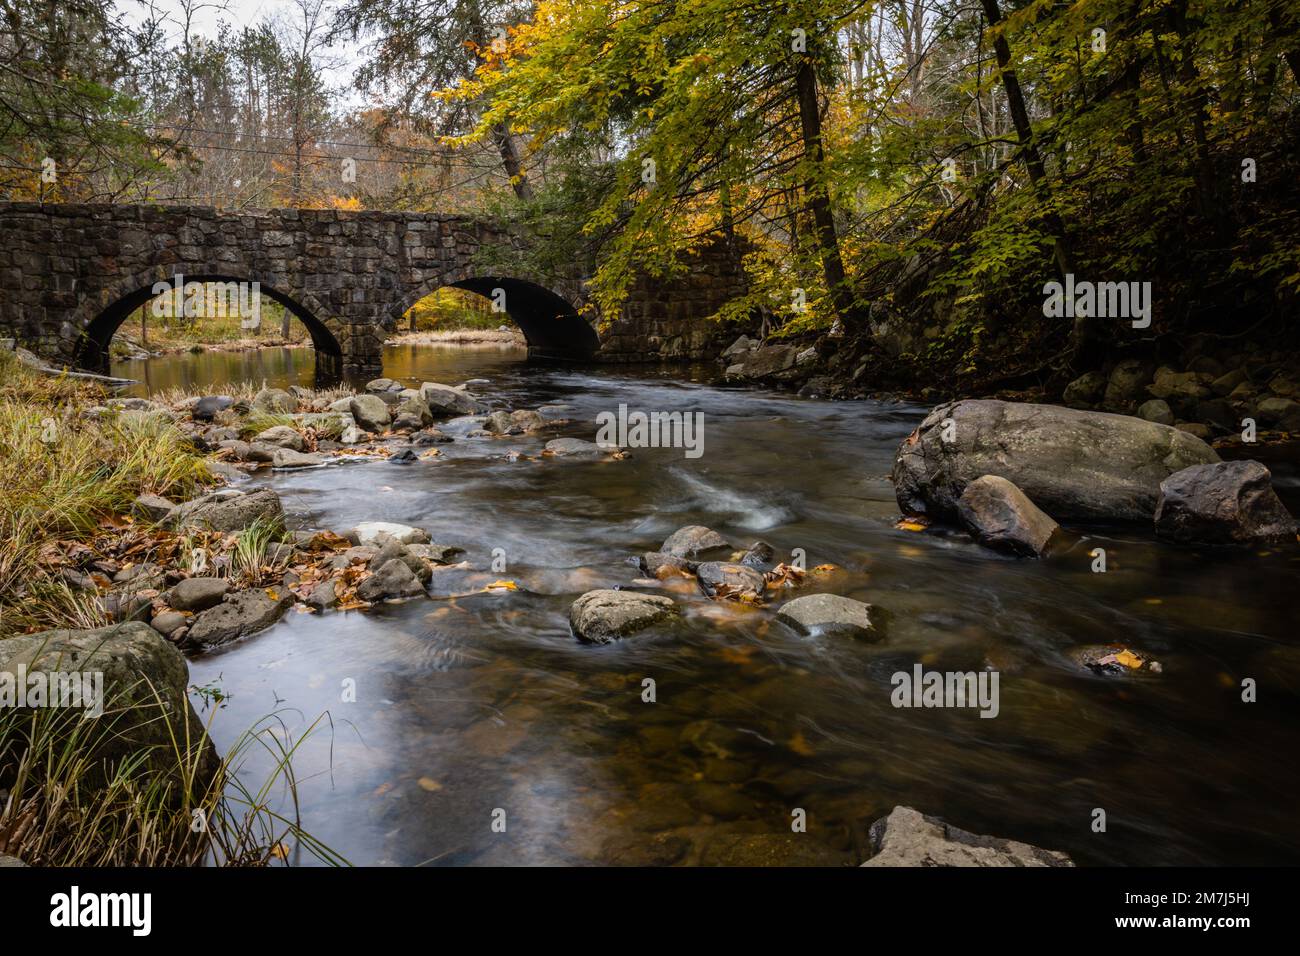 A beautiful shot of a flowing rocky river in Stokes State Forest in Sussex County, NJ Stock Photo